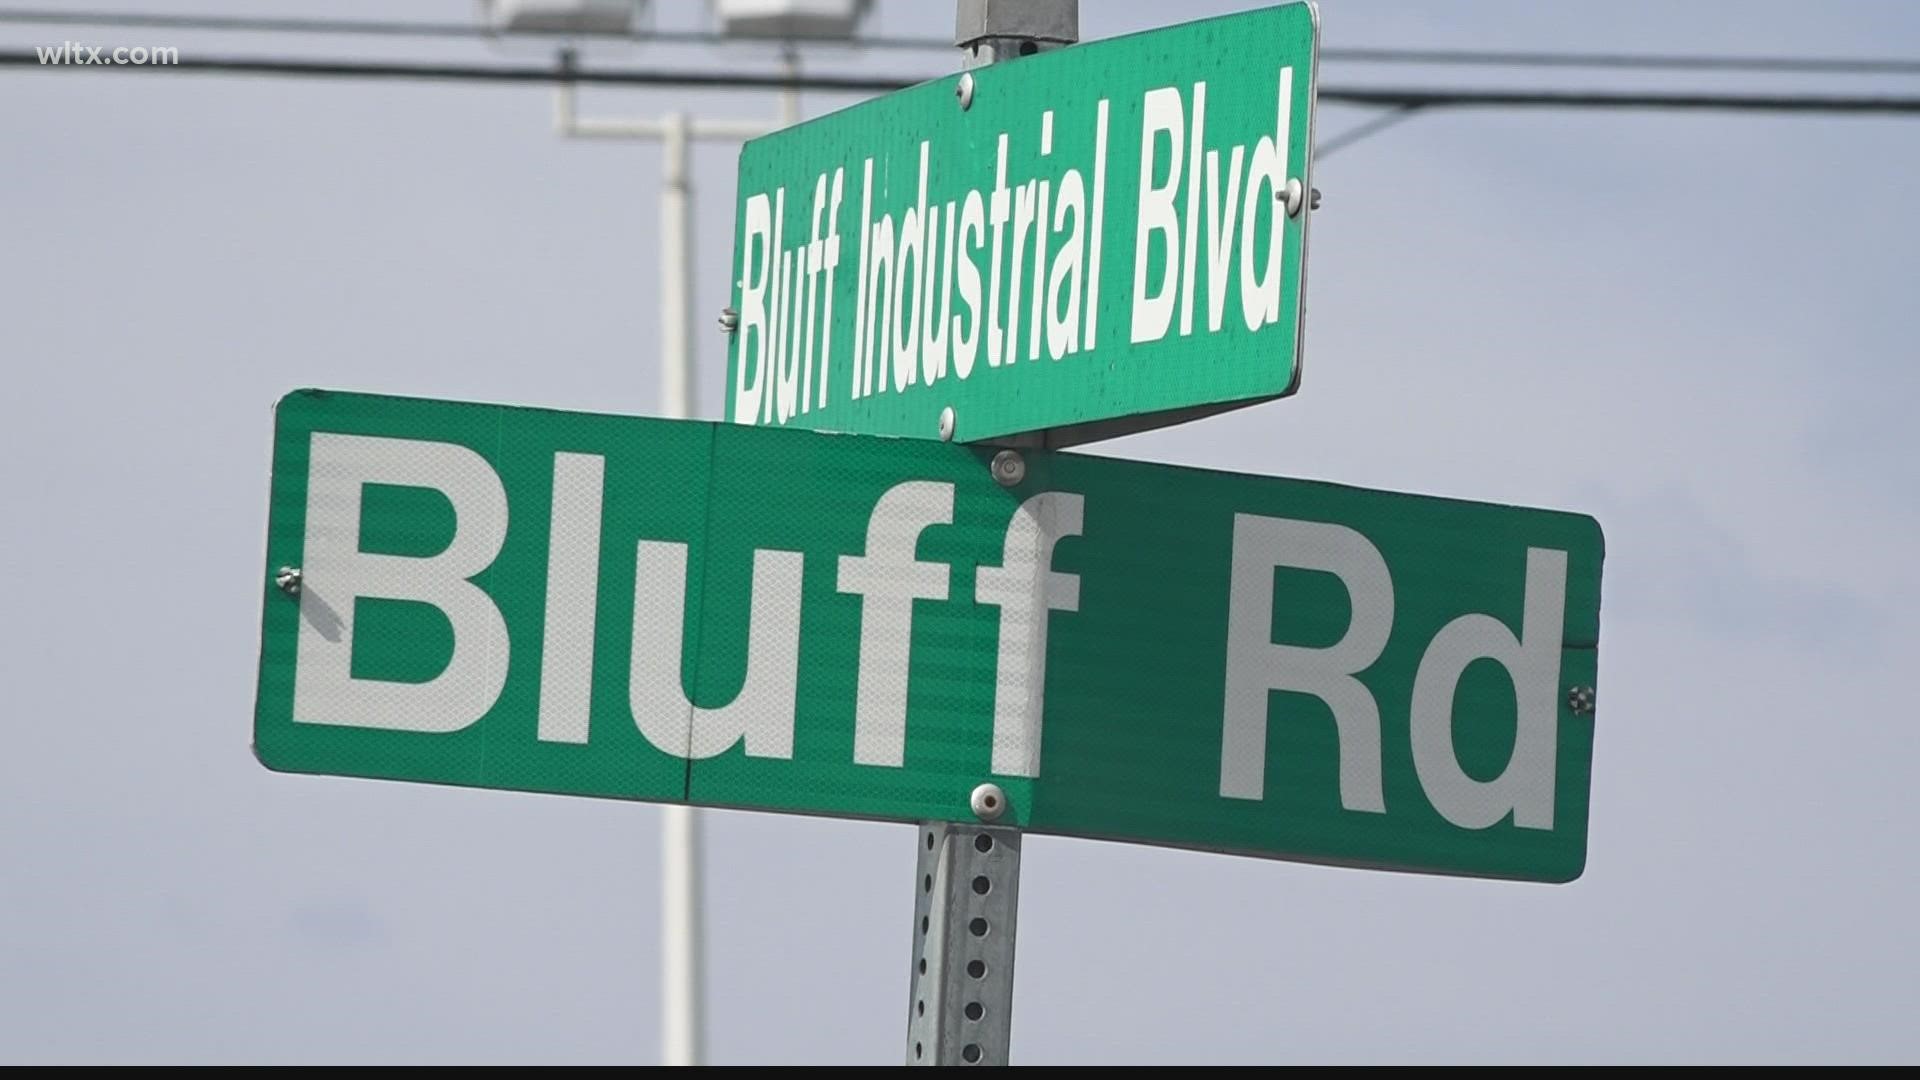 More intersections, traffic lights, and smoother asphalt are coming to Bluff Road in Columbia.